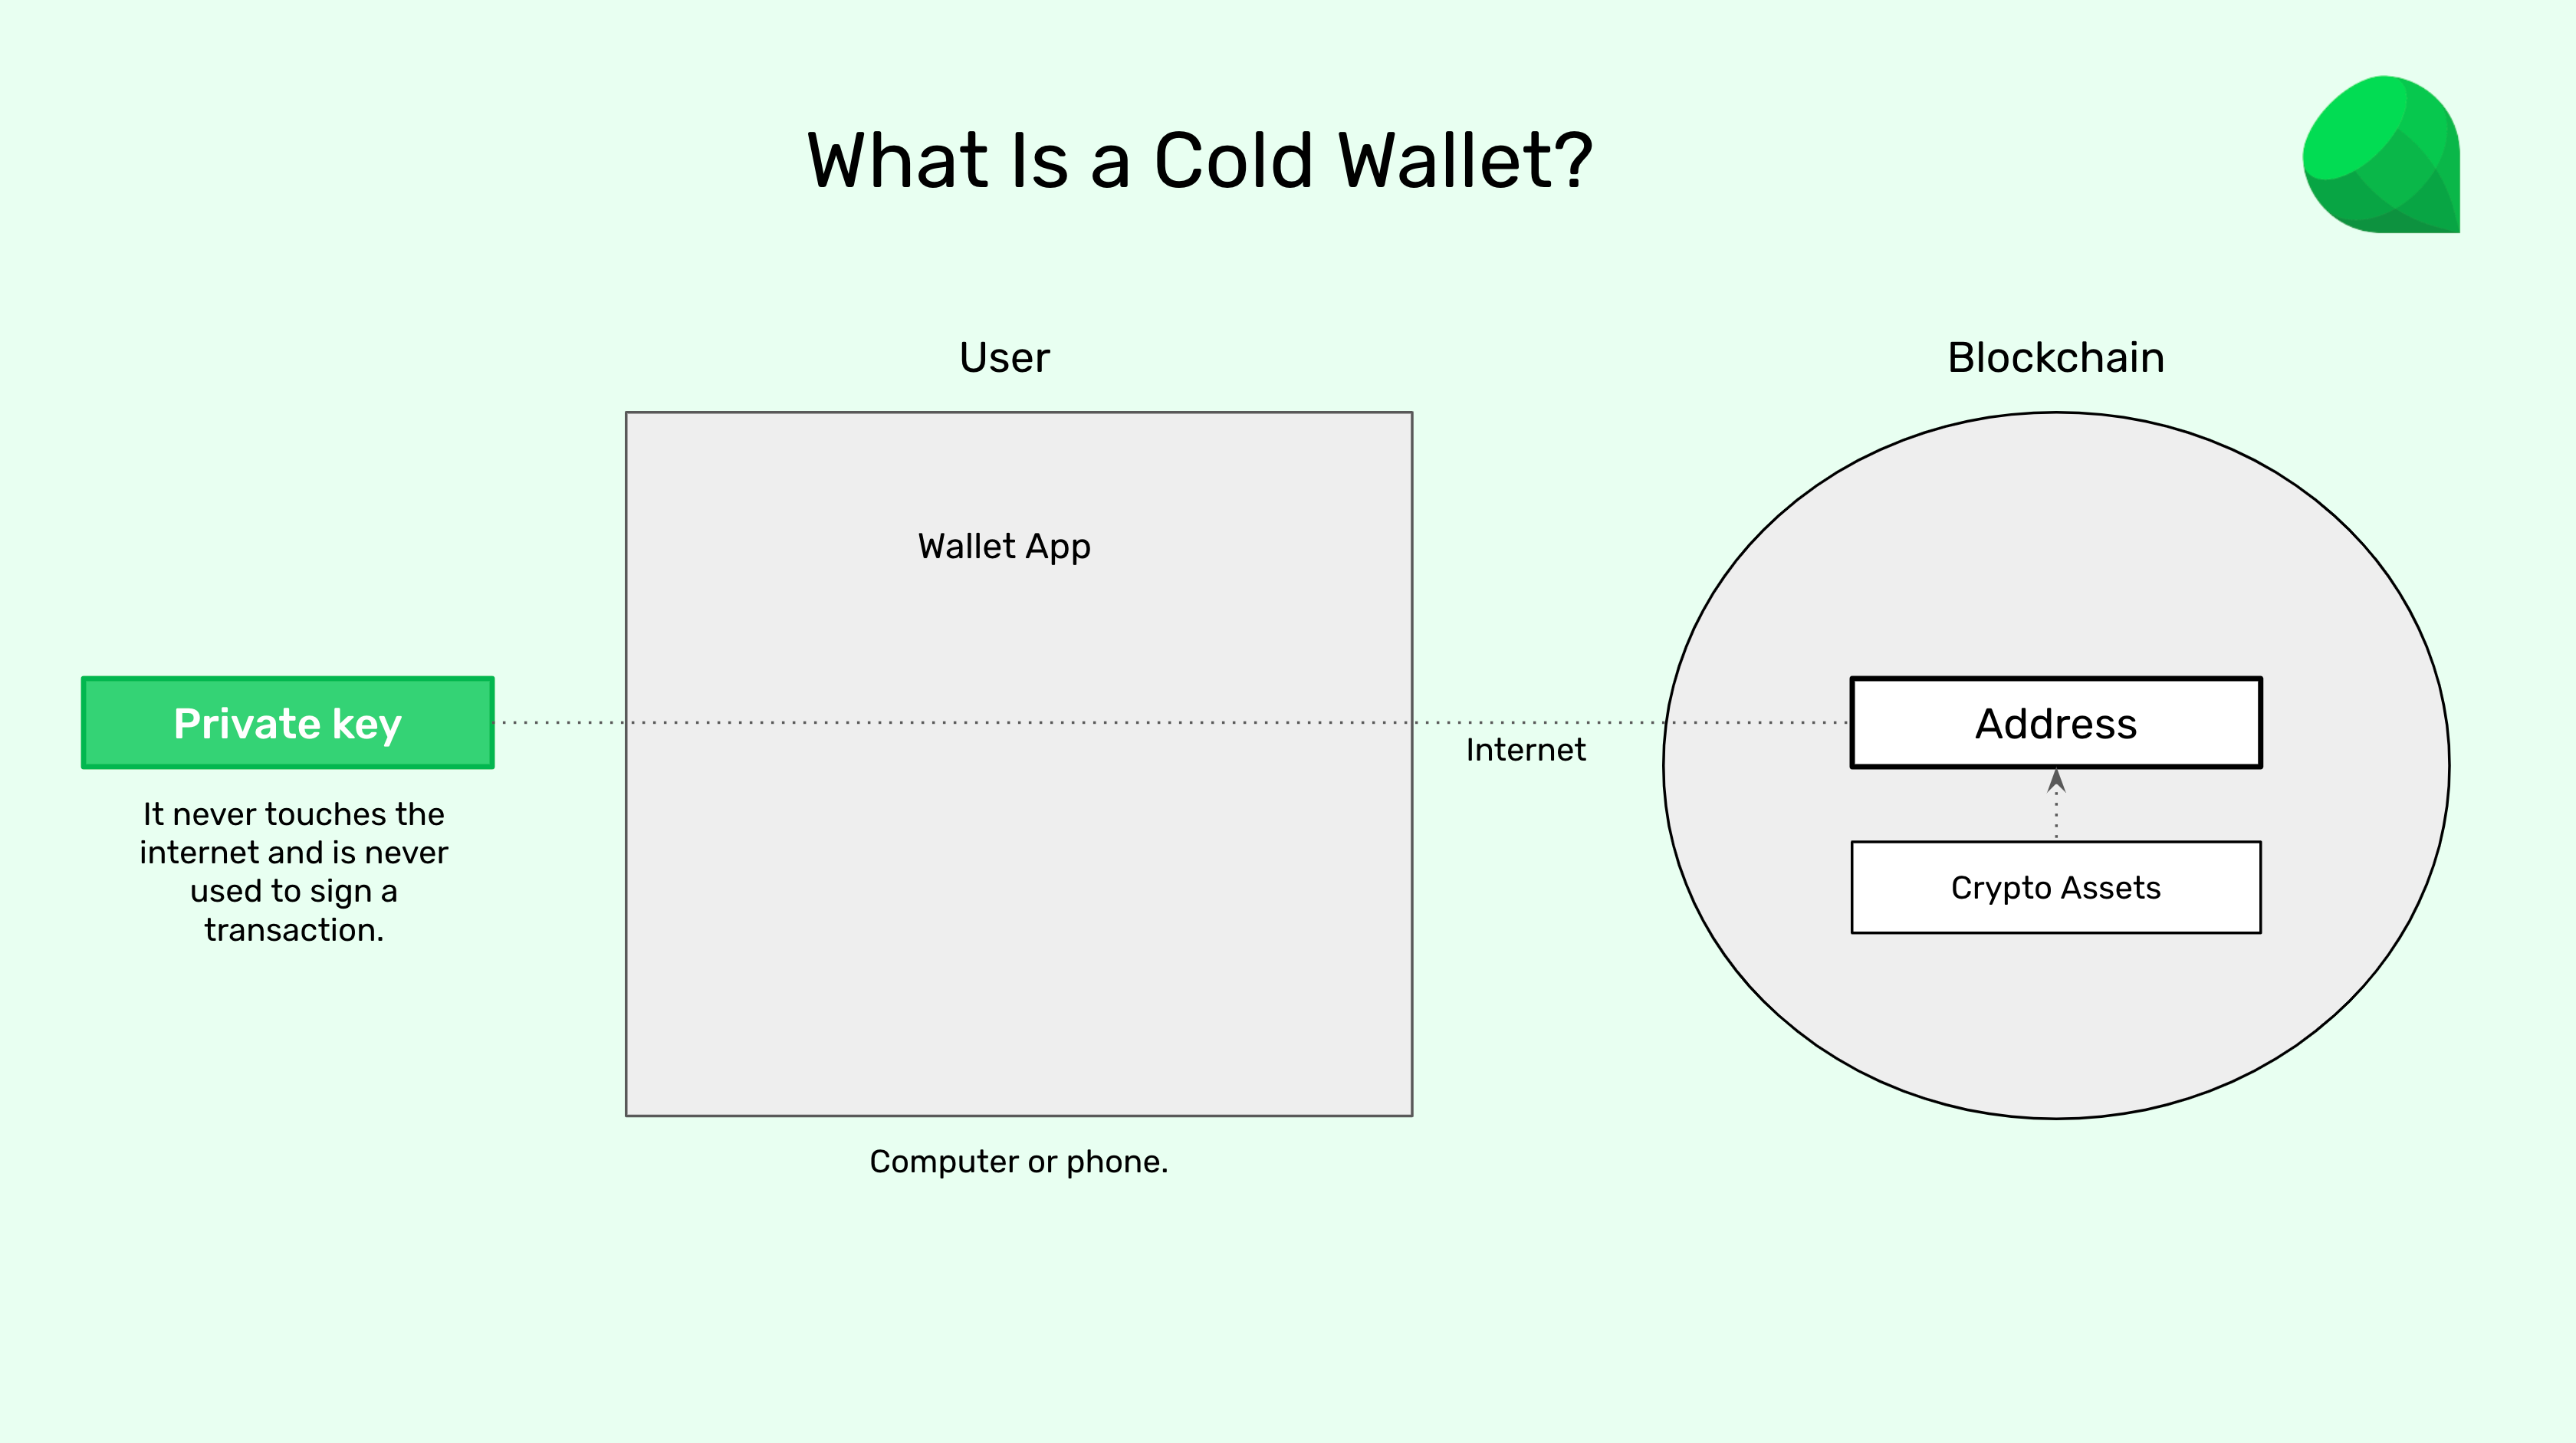 What is a cold wallet?